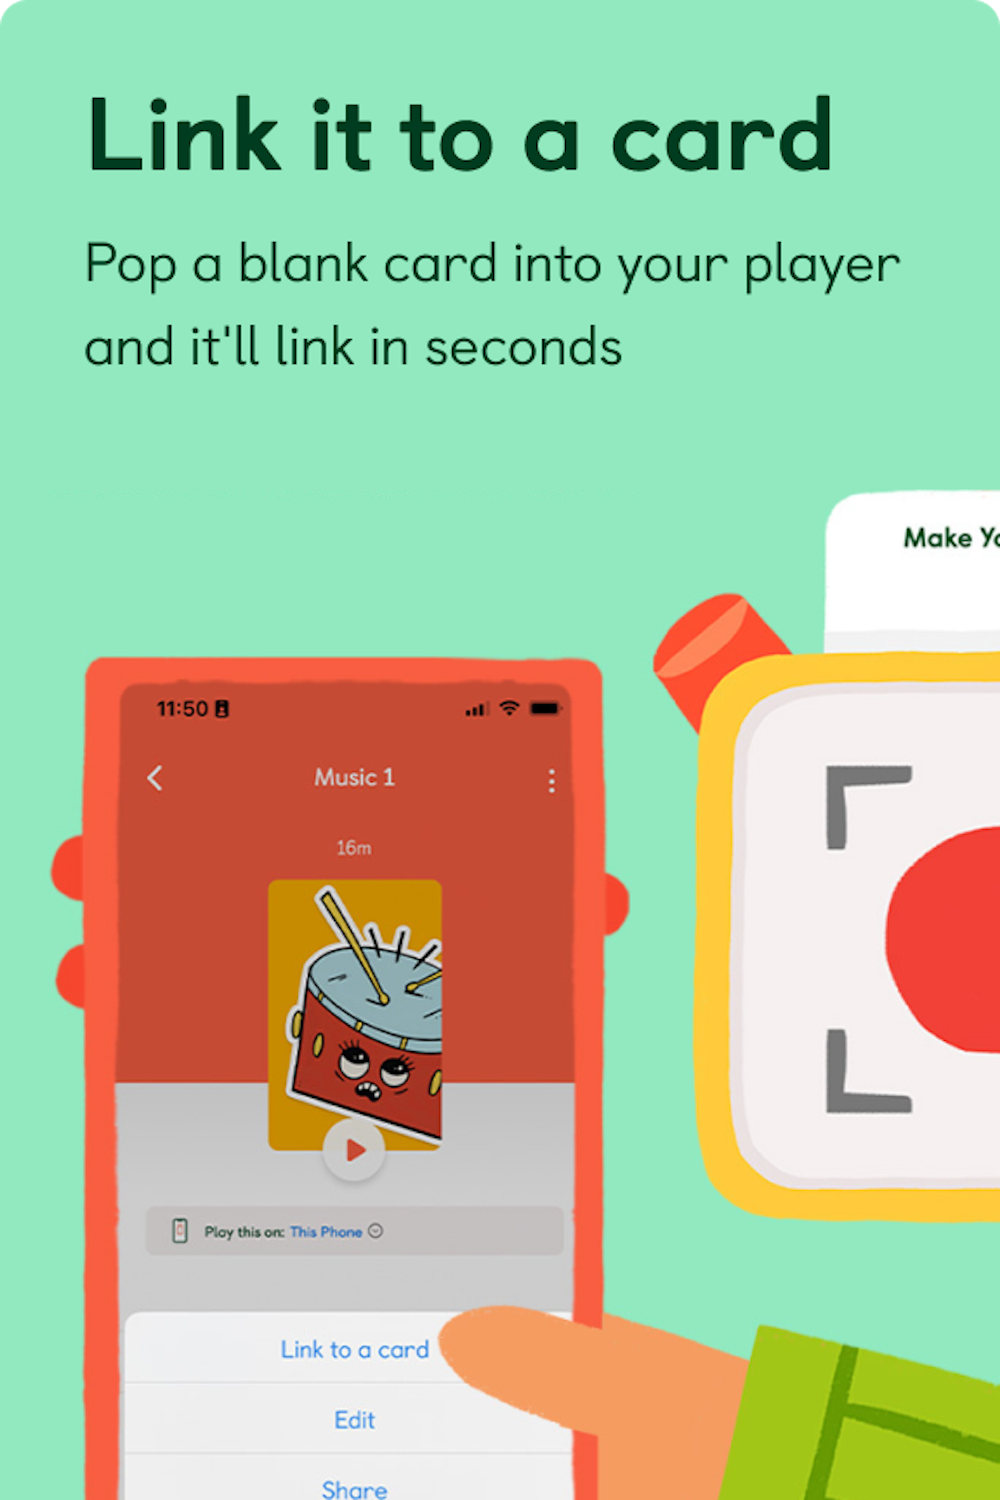 Link it to a card - Pop a blank card into your player and it'll link in seconds